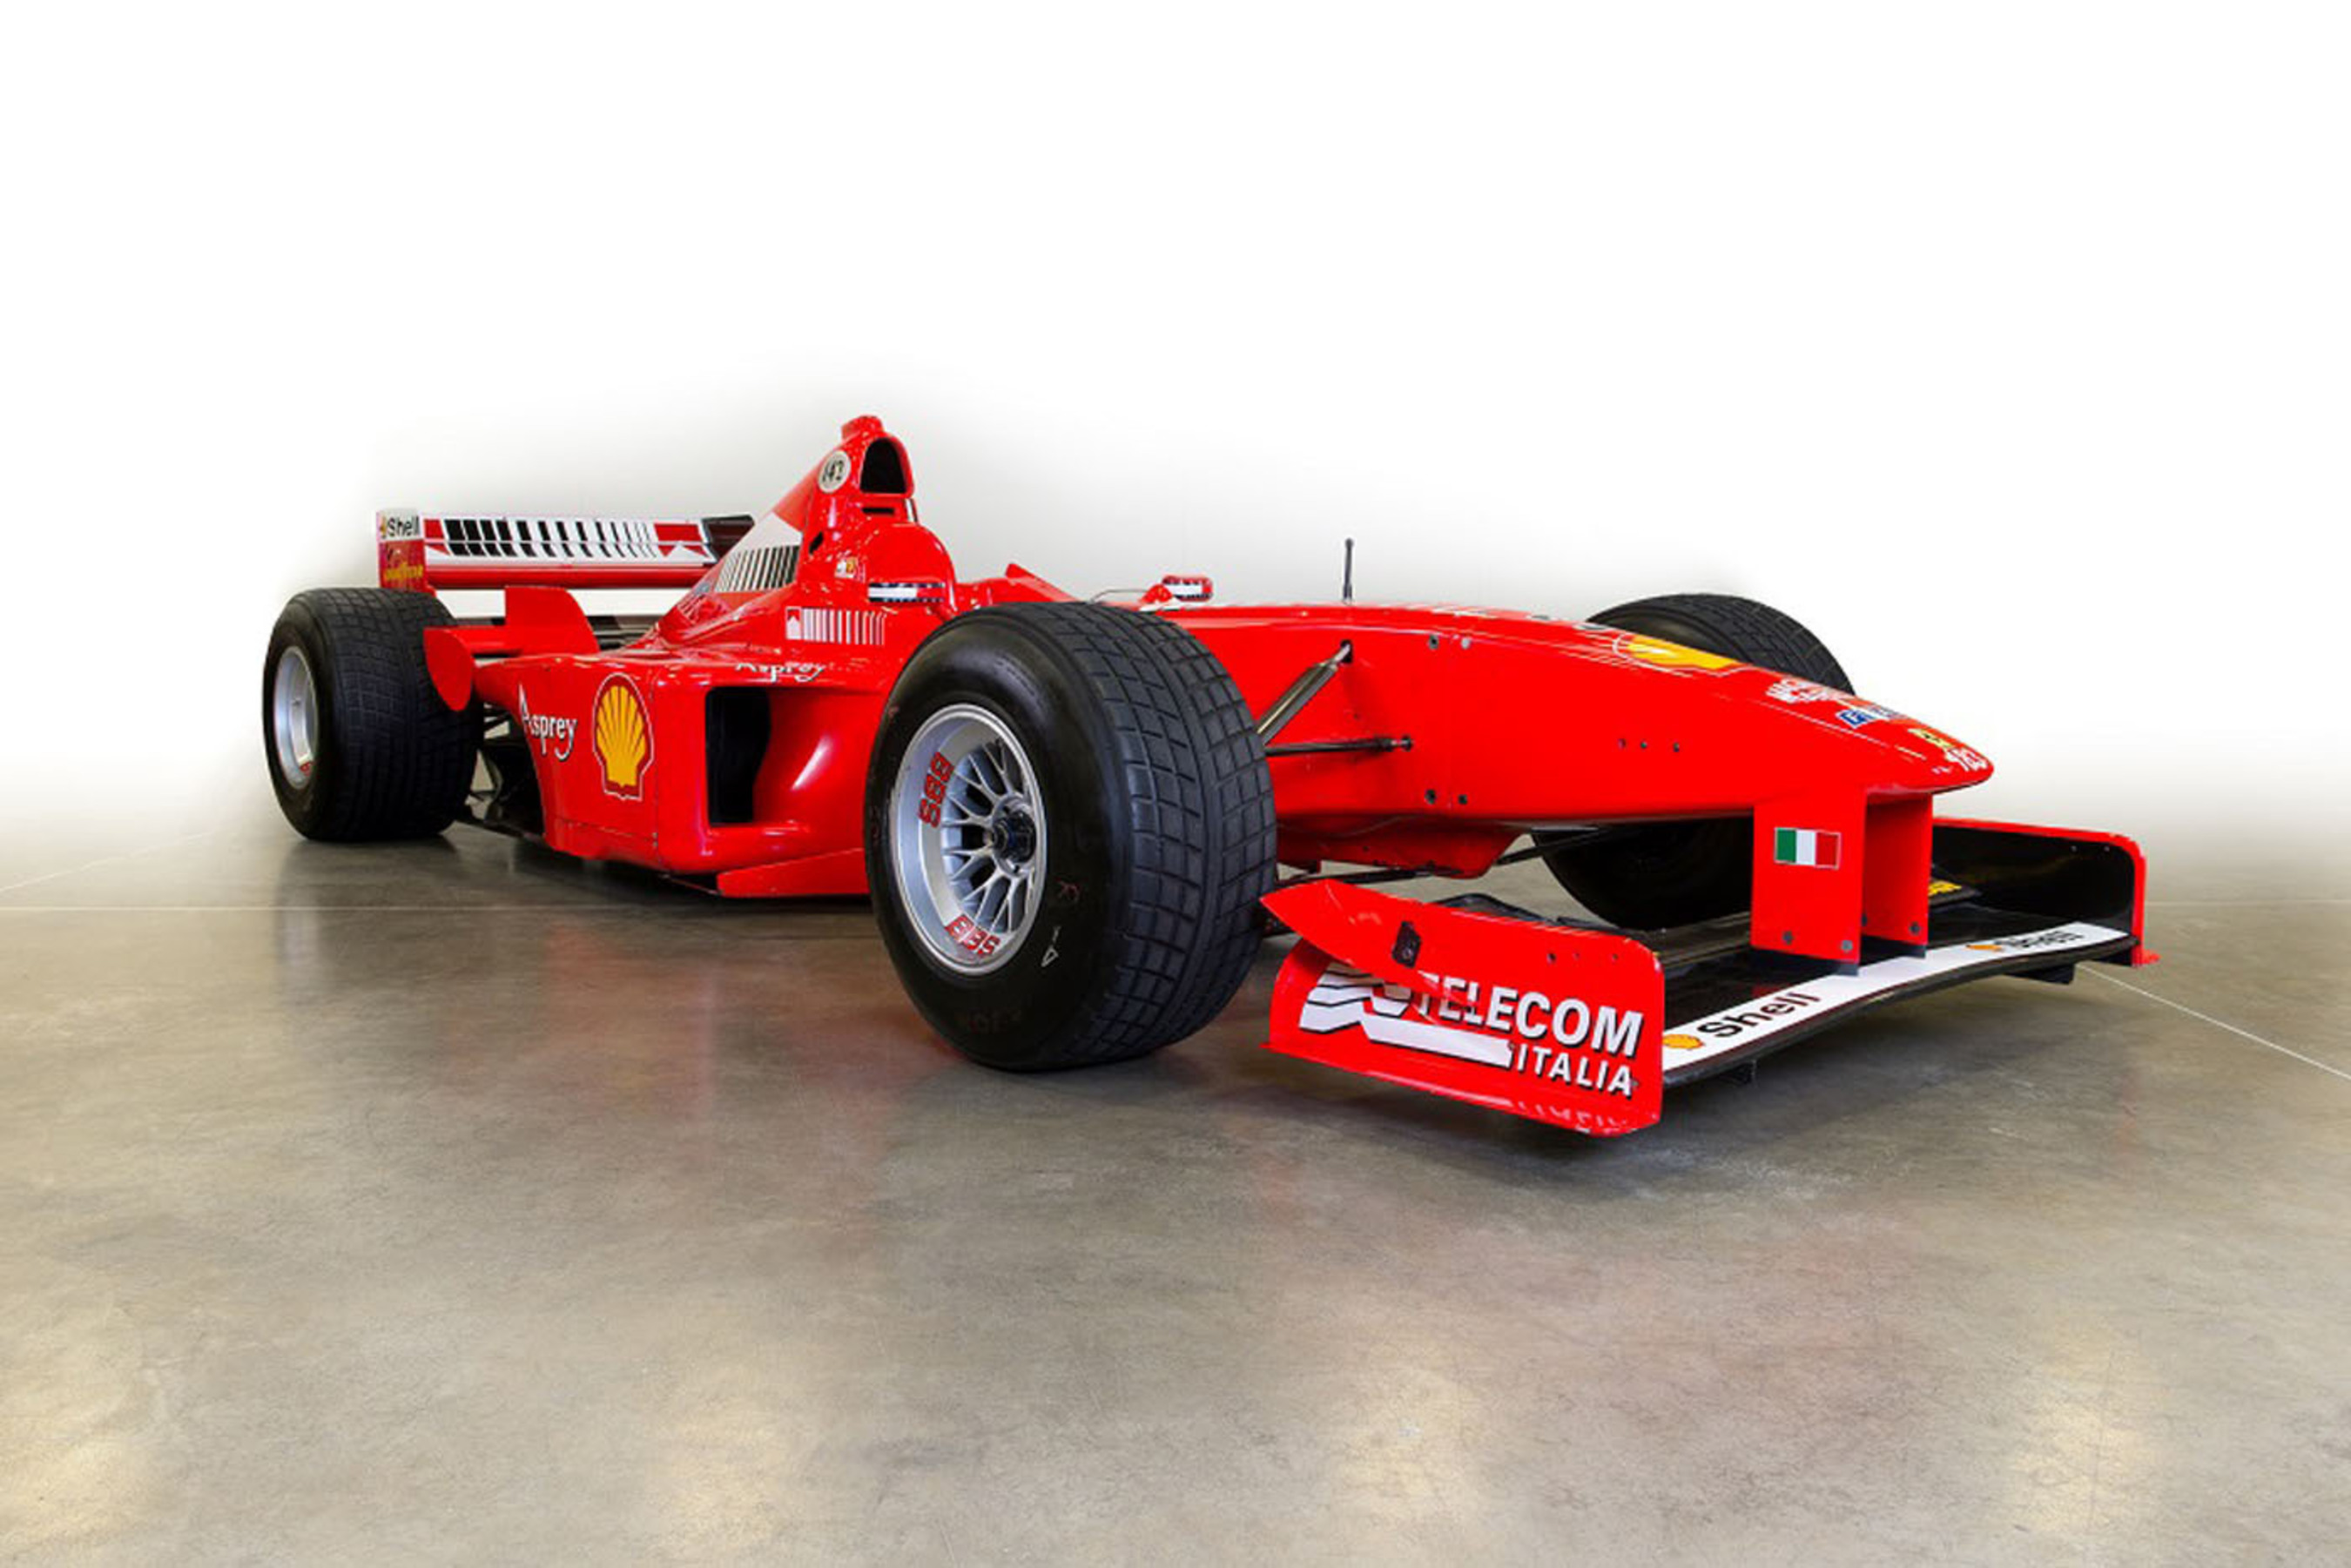 Milton Verret's 1998 Ferrari F300 Formula One (F1) racing car, driven by F1 World Champion Michael Schumacher. Milton Verret's F1 Ferrari will be sold along with 75 other rare cars at the Motostalgia Grand Prix Auction to be held on November 16 as part of the 2013 United States Formula 1 Grand Prix weekend in Austin, Texas. (PRNewsFoto/Milton Verret) (PRNewsFoto/MILTON VERRET)